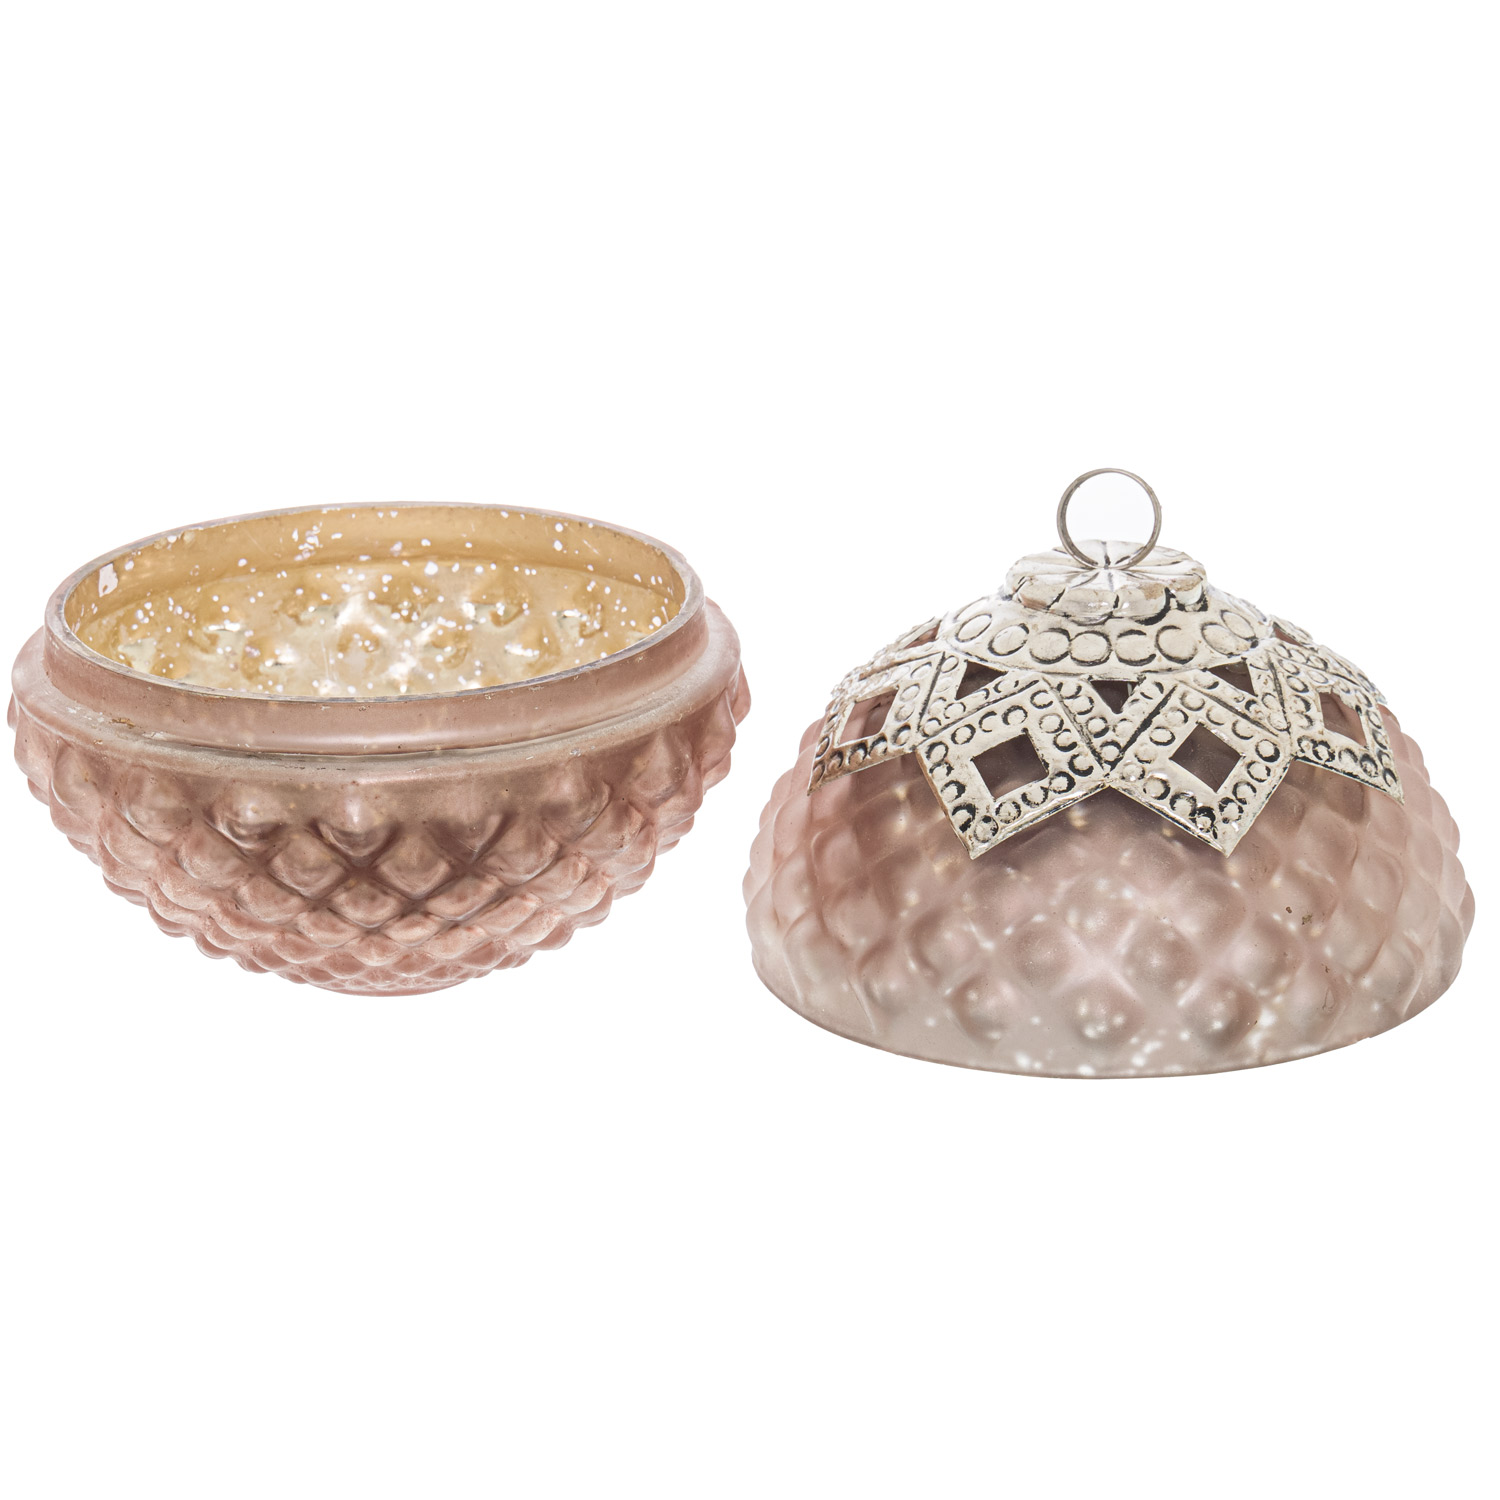 The Noel Collection Venus Diamond Crested Trinket Bauble - Image 2